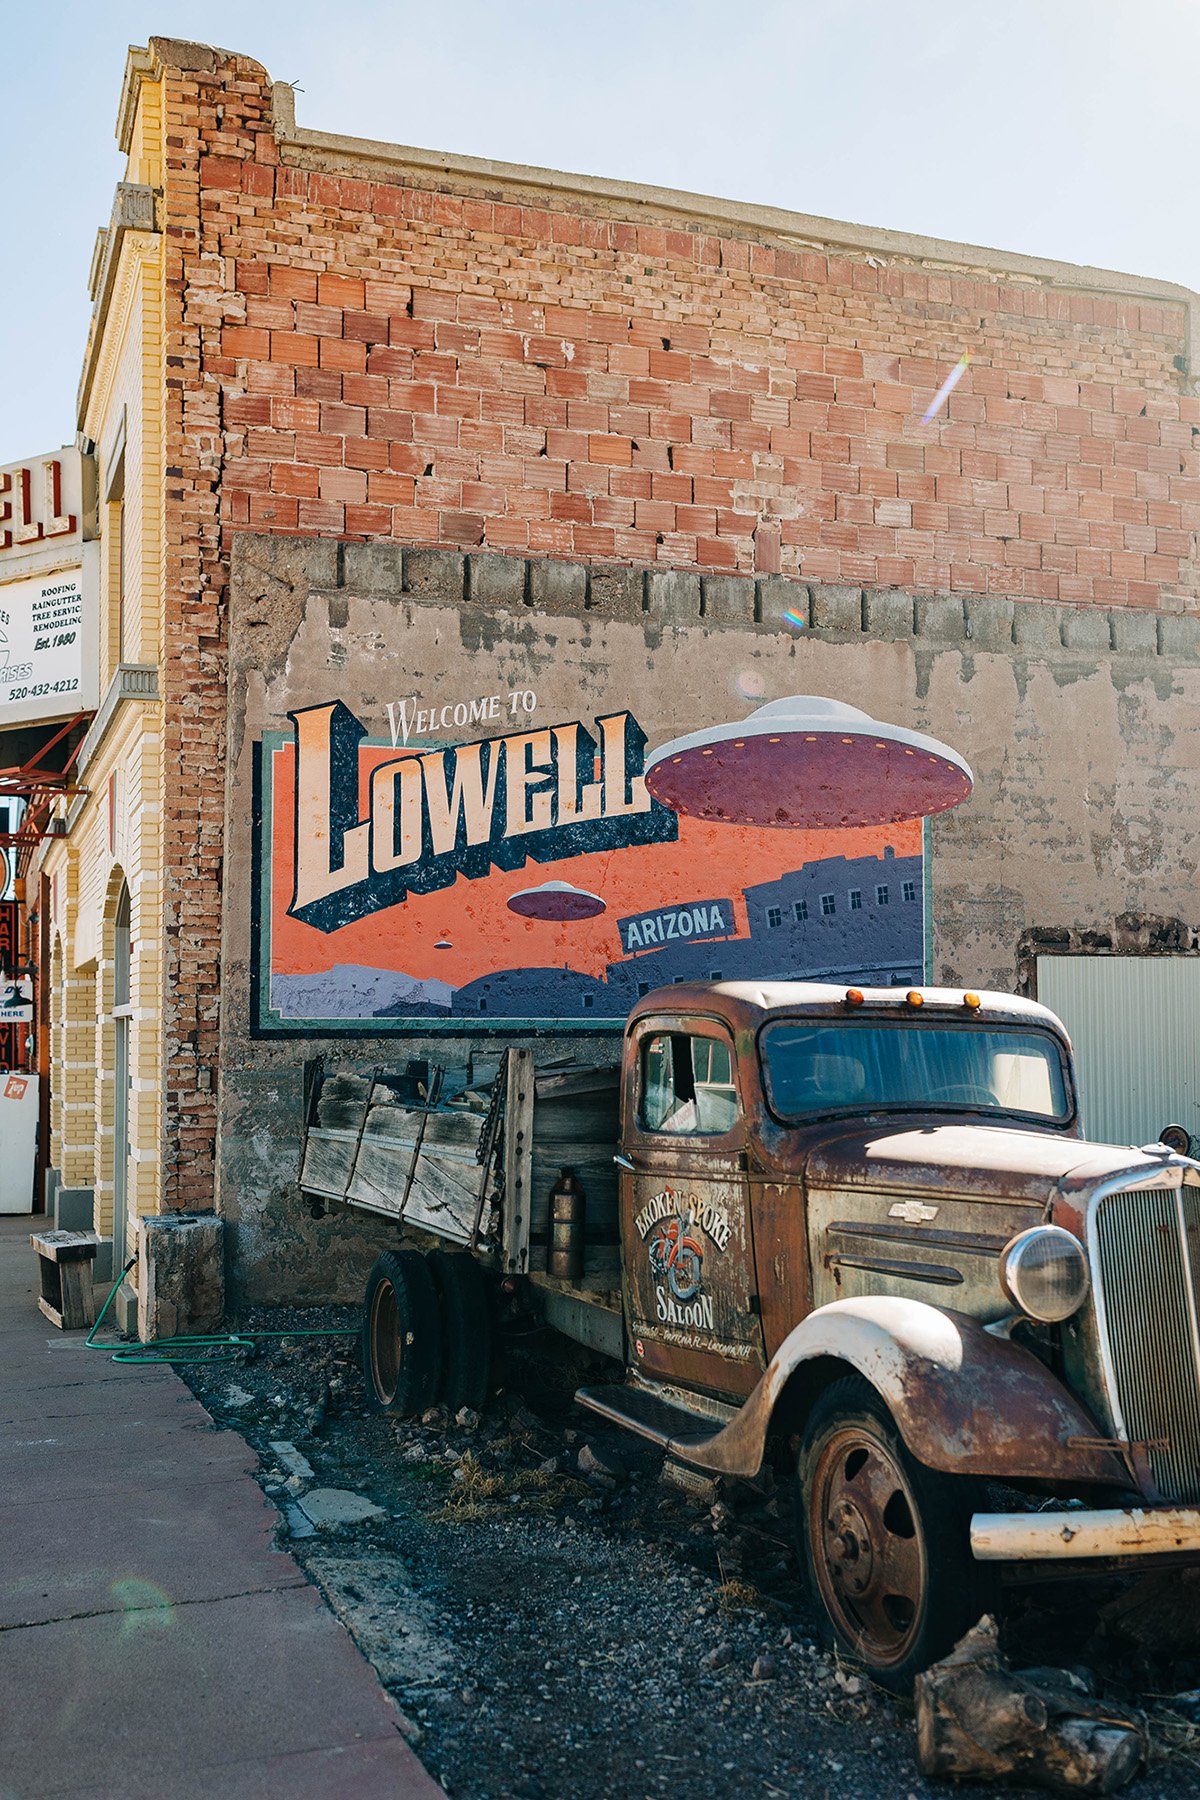 A retro car sits in front of a welcome mural in Bisbee, Arizona.